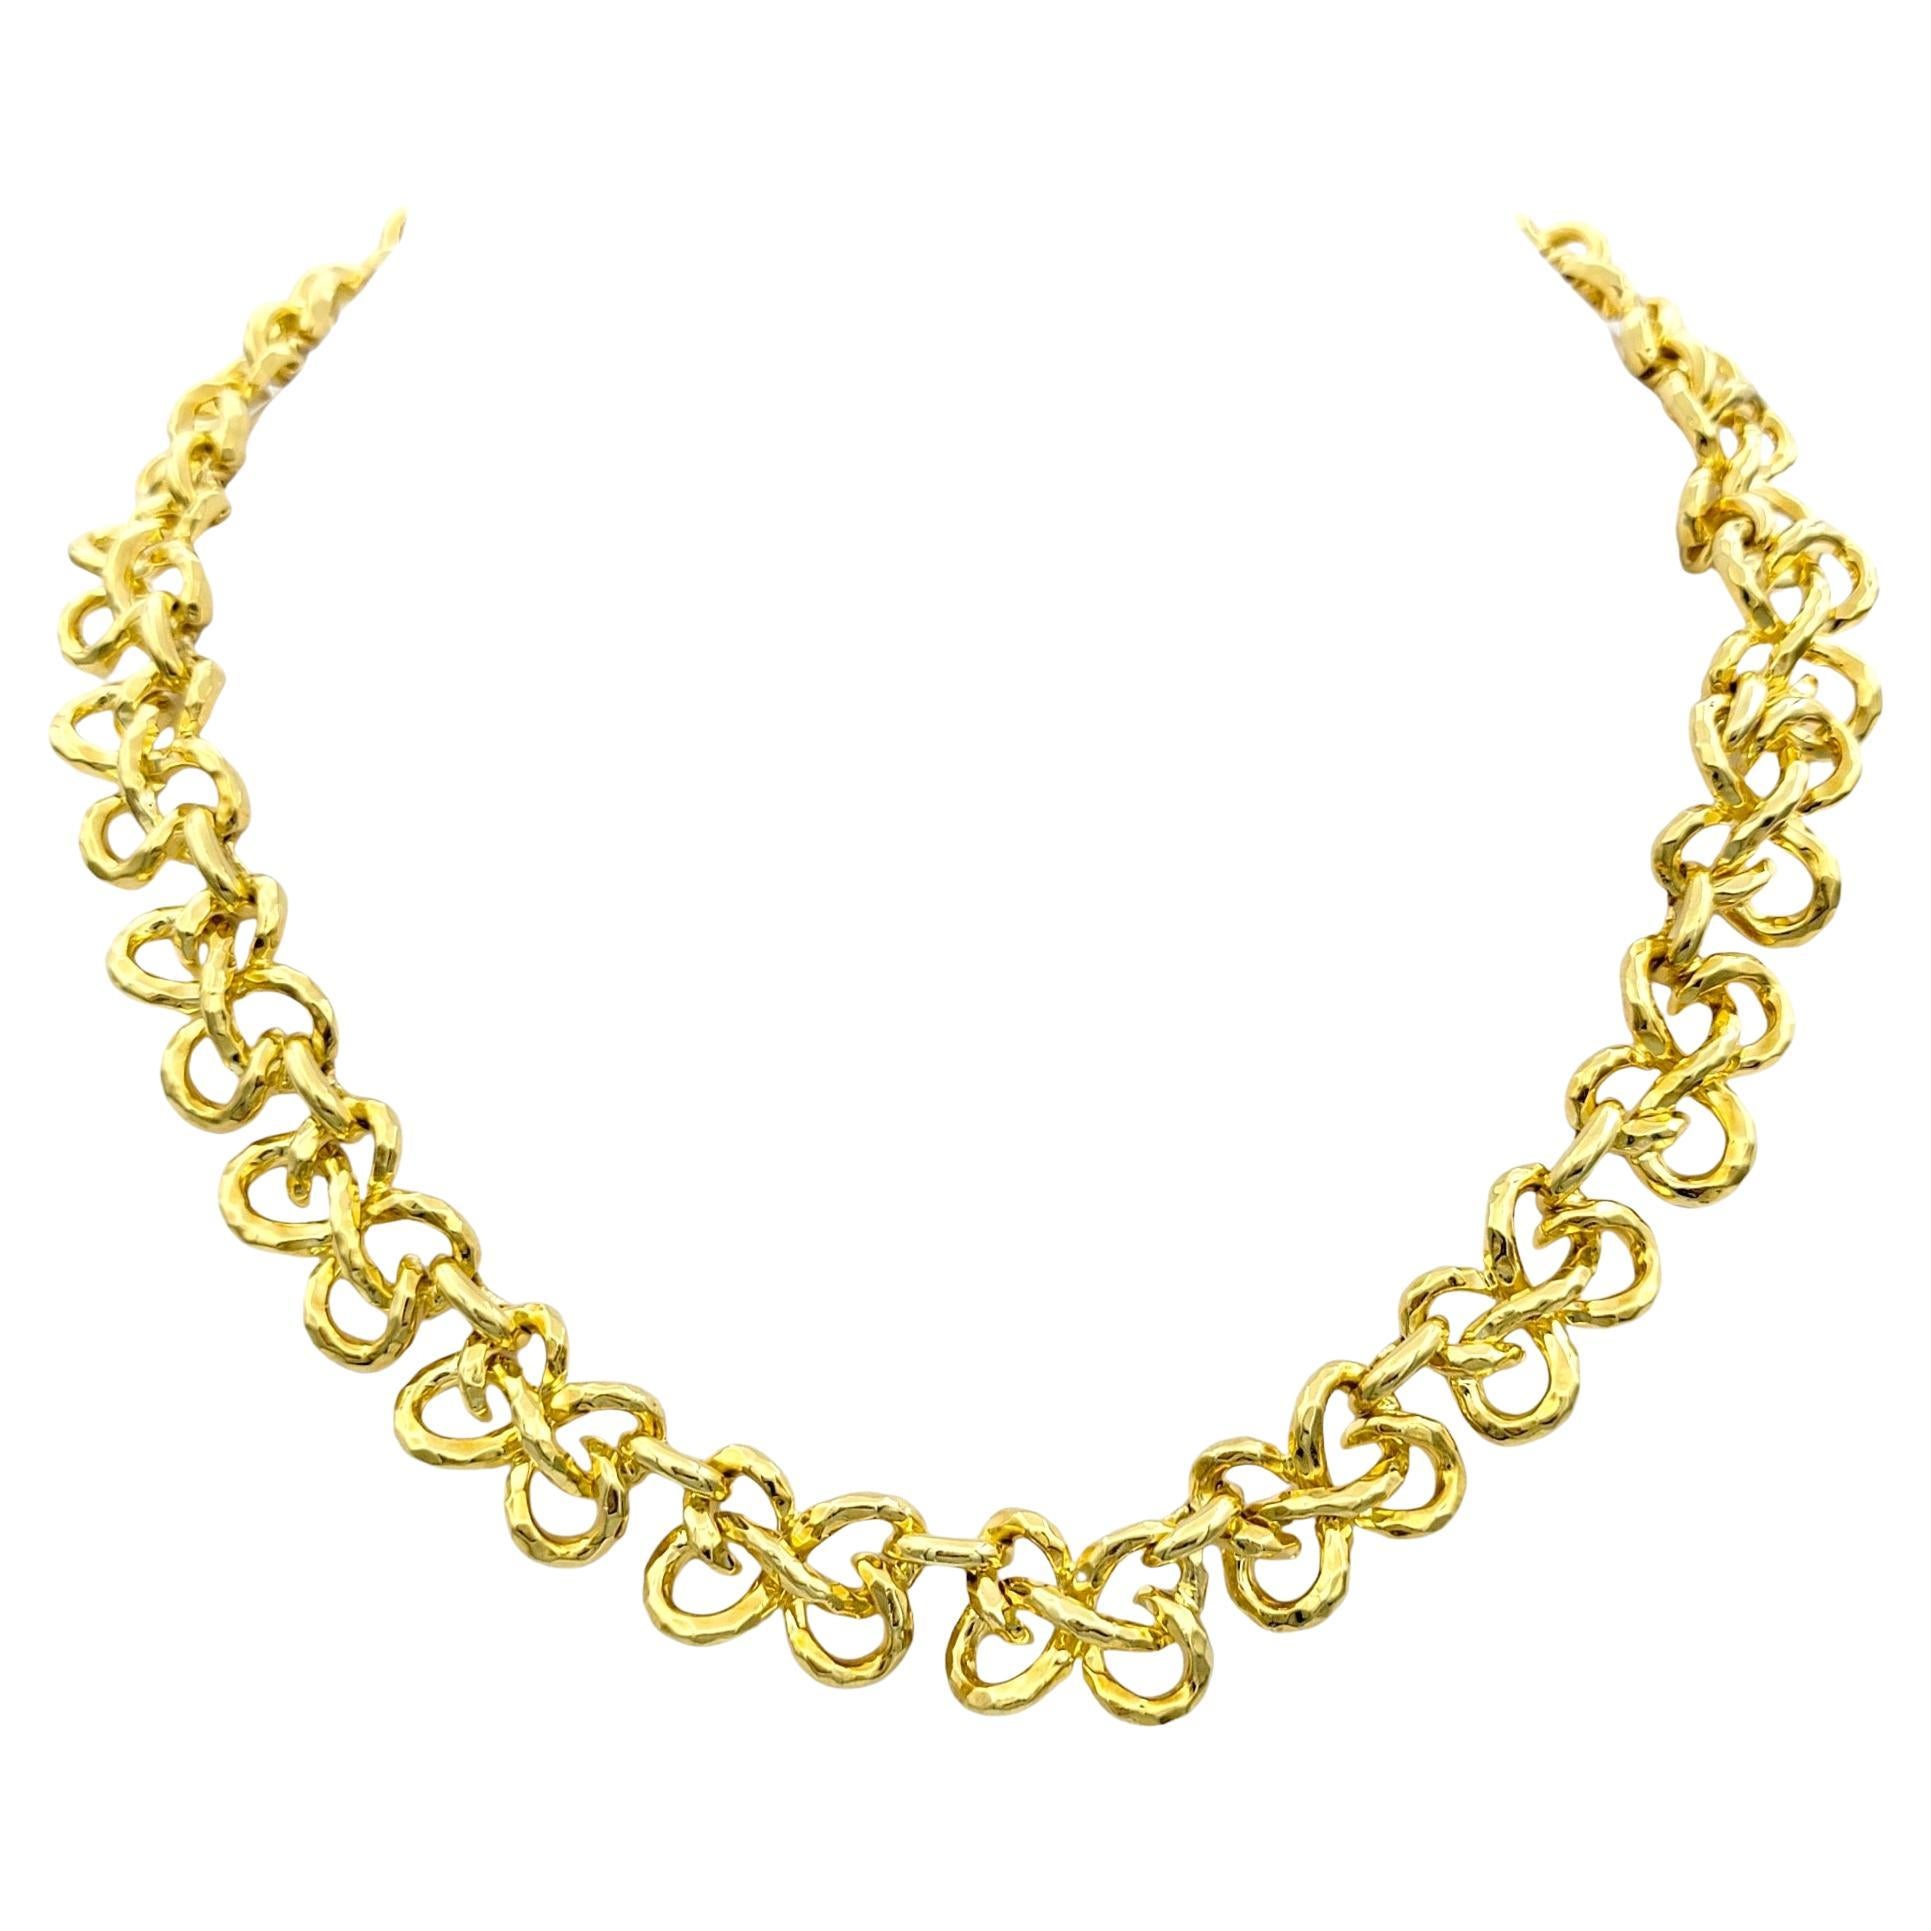 Henry Dunay Twisted Ribbon Link Collar Necklace Set in 18 Karat Yellow Gold For Sale